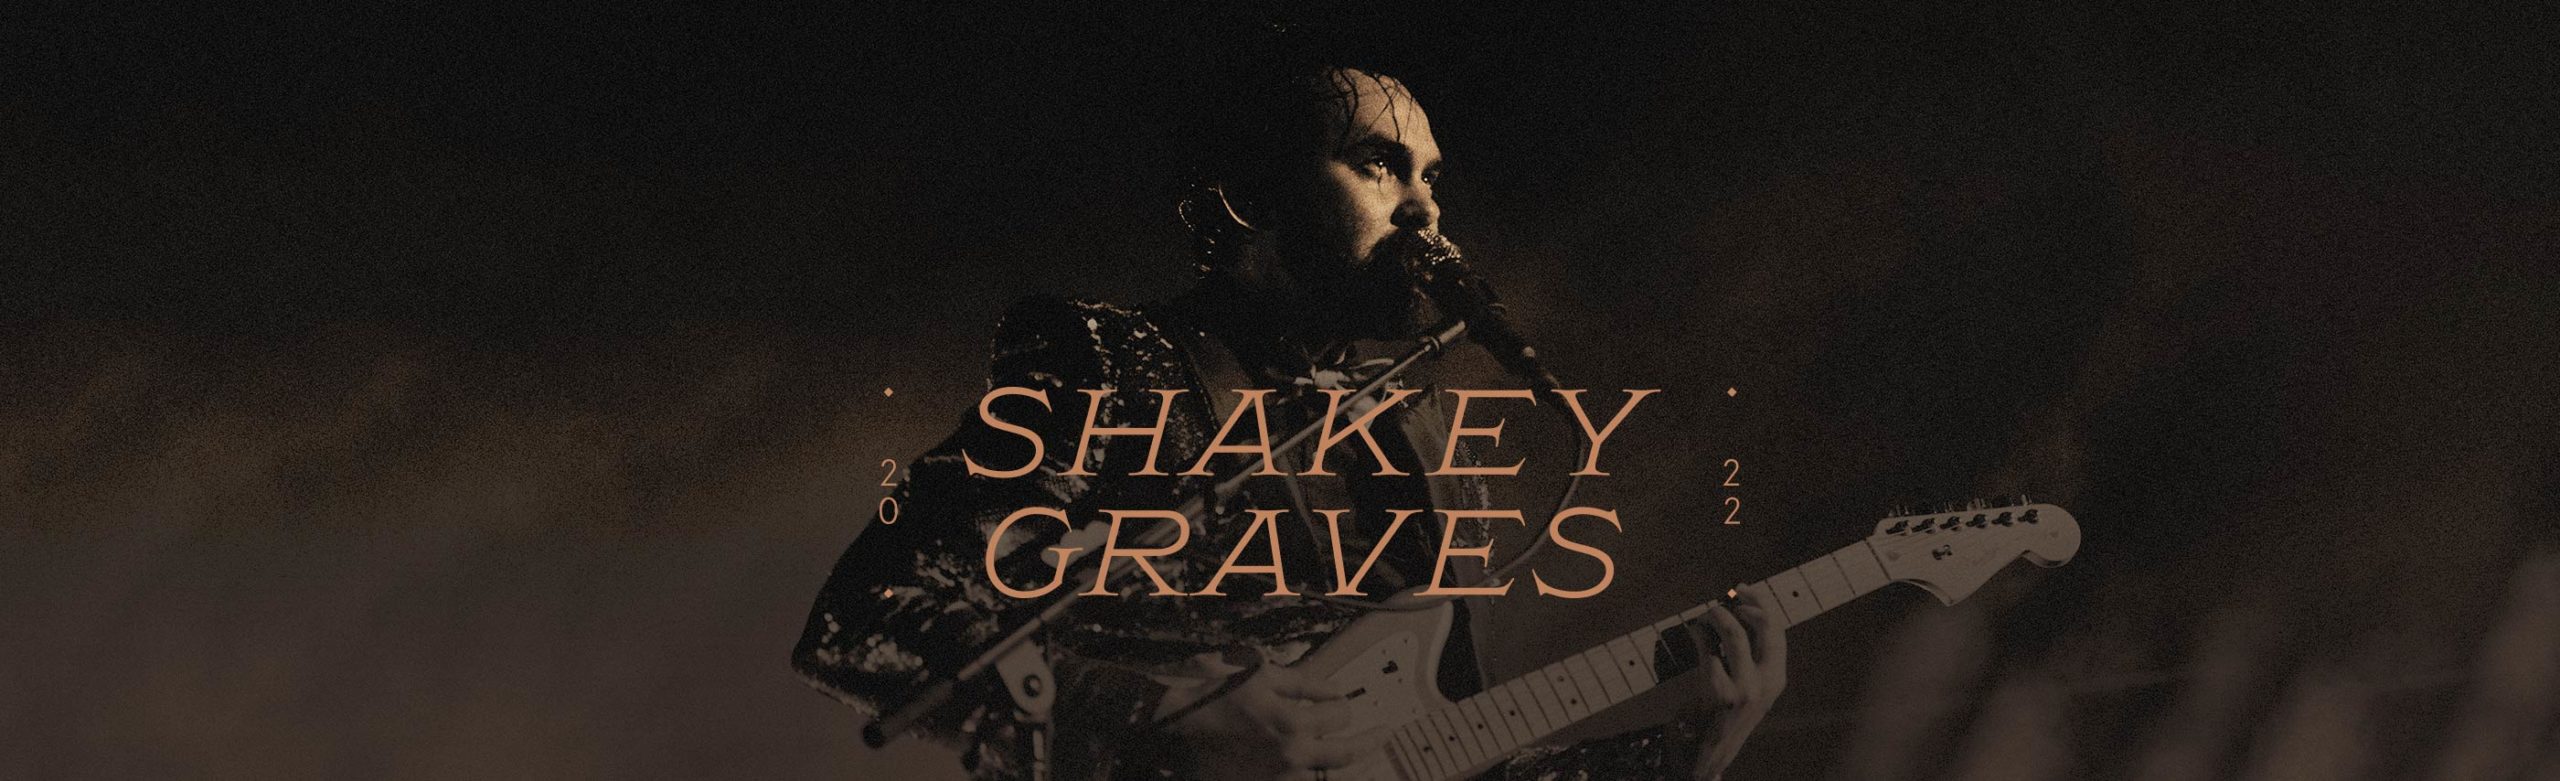 Shakey Graves with Sierra Ferrell Tickets + Autographed LP Vinyl Giveaway 2022 Image